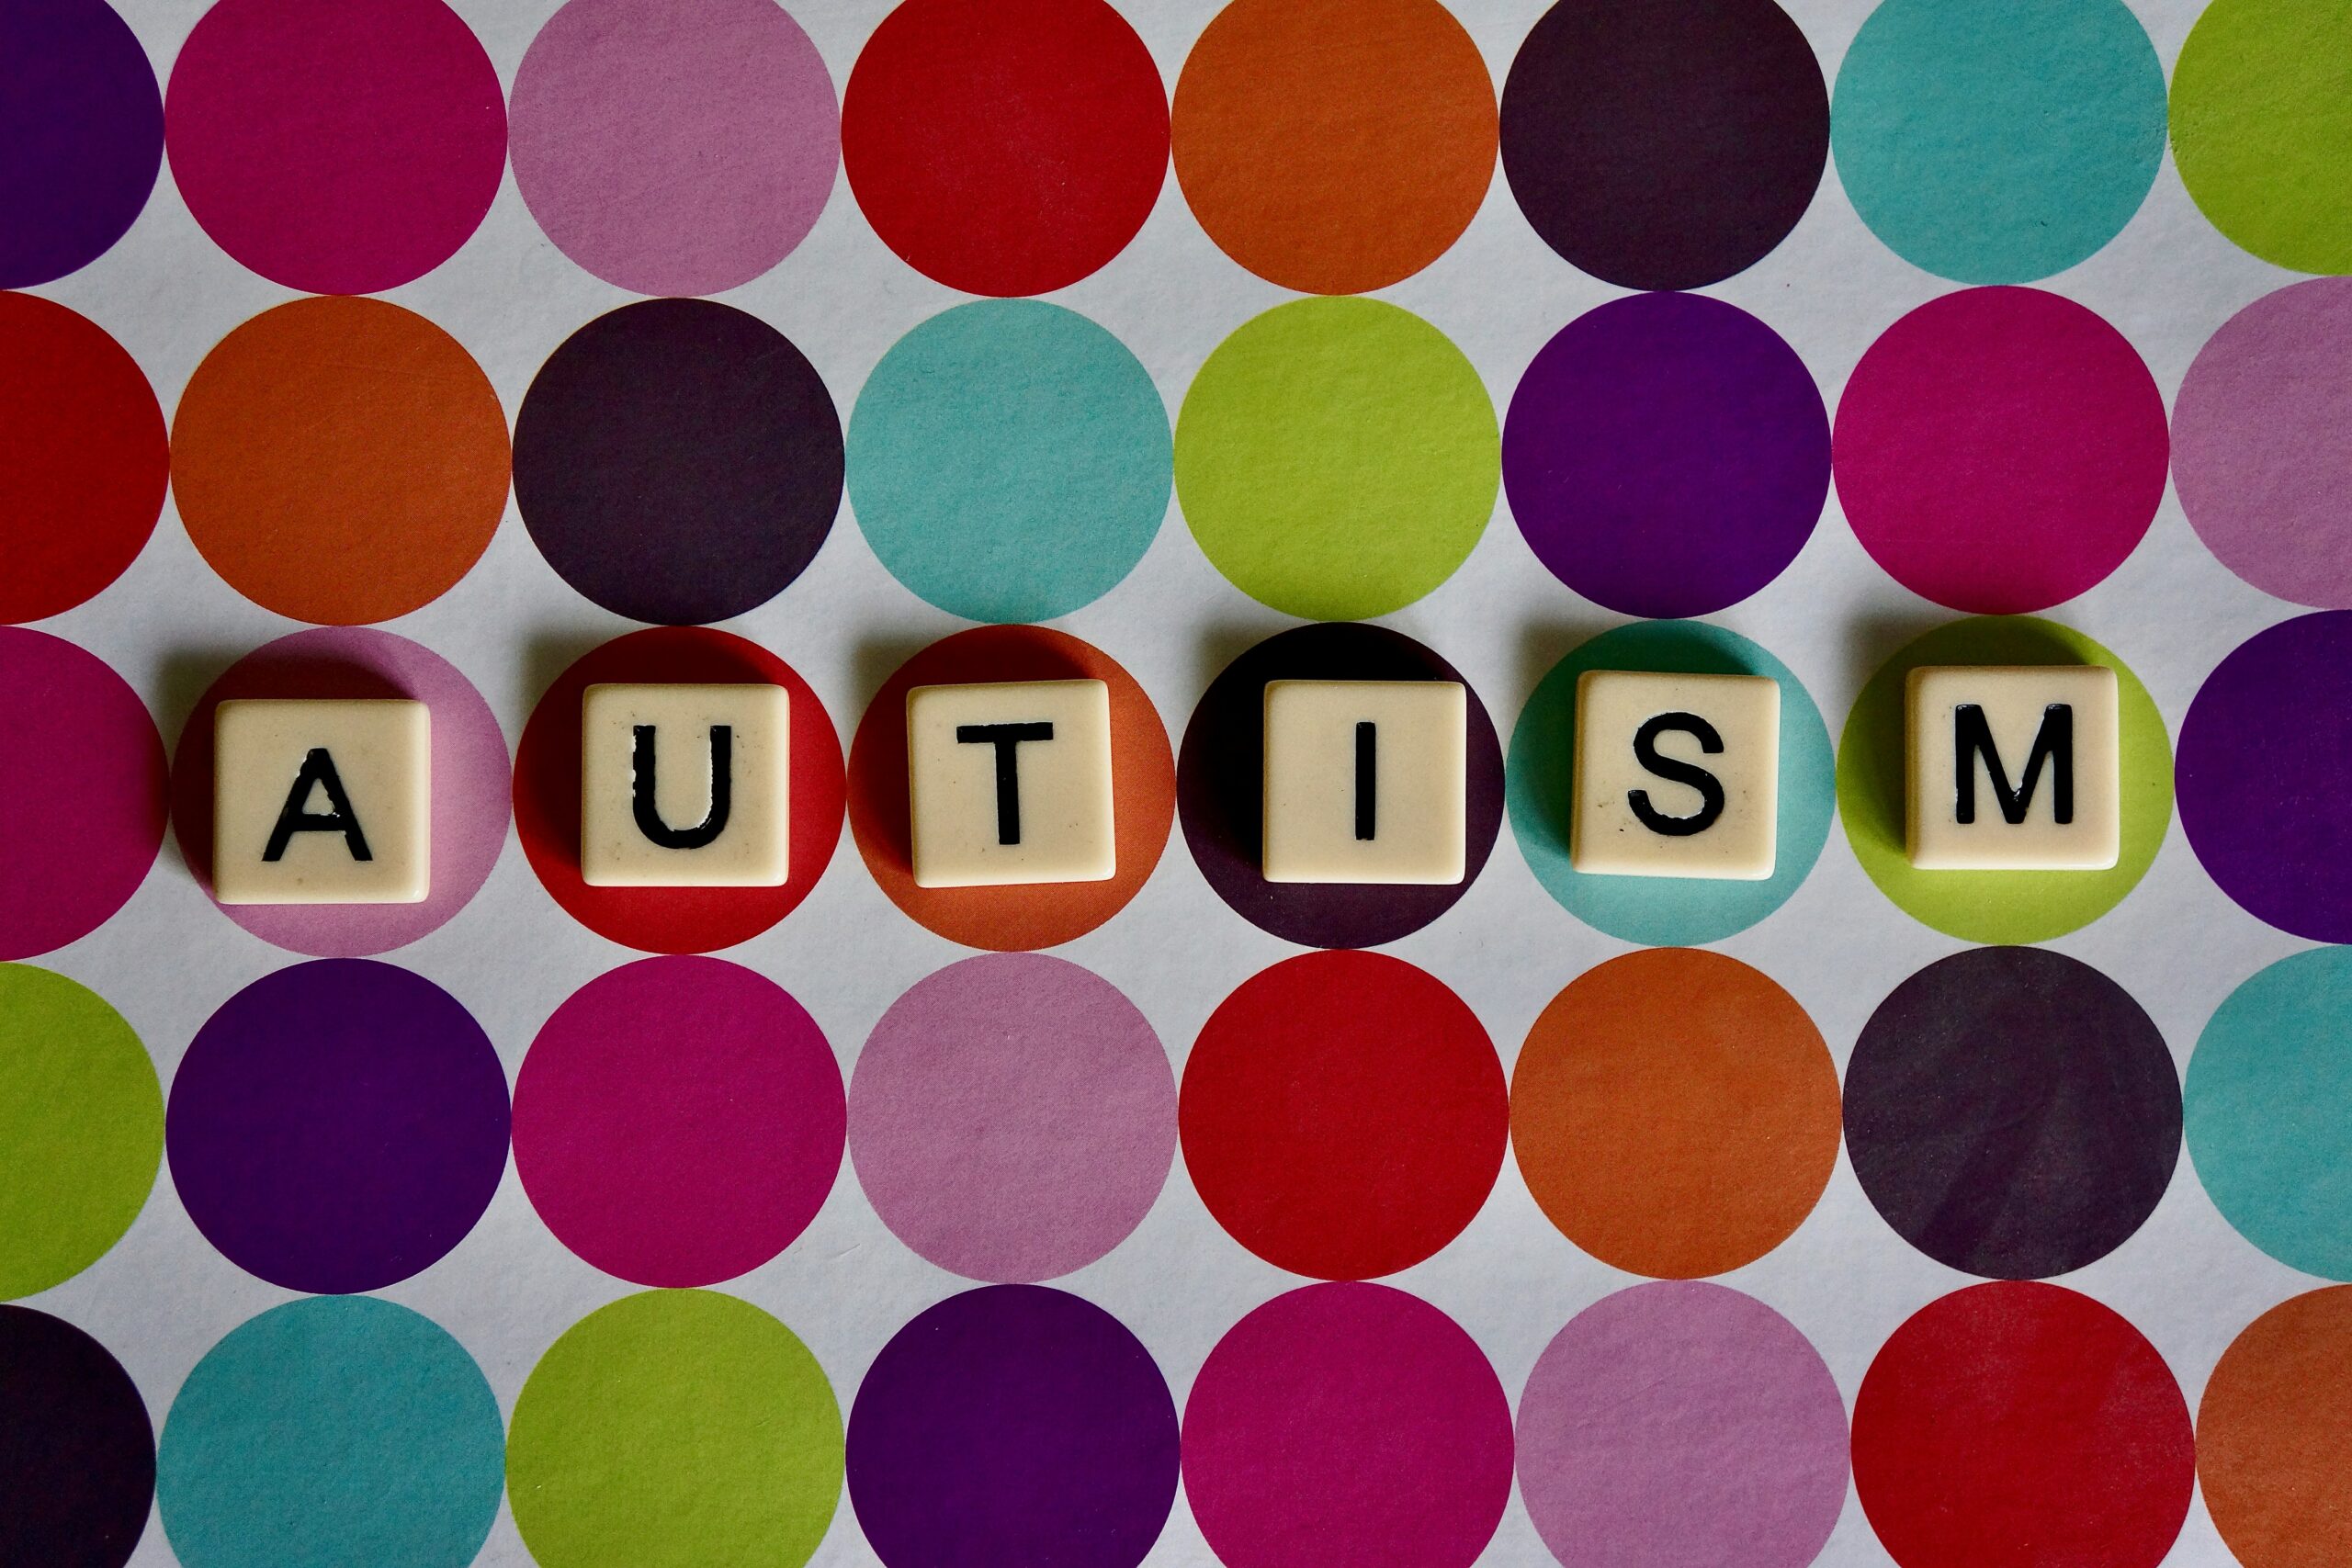 Autism, also known as autism spectrum disorder or ASD for short, is a neurological and developmental disorder that causes the person to experience challenges or differences in their intellectual, social, and physical abilities.